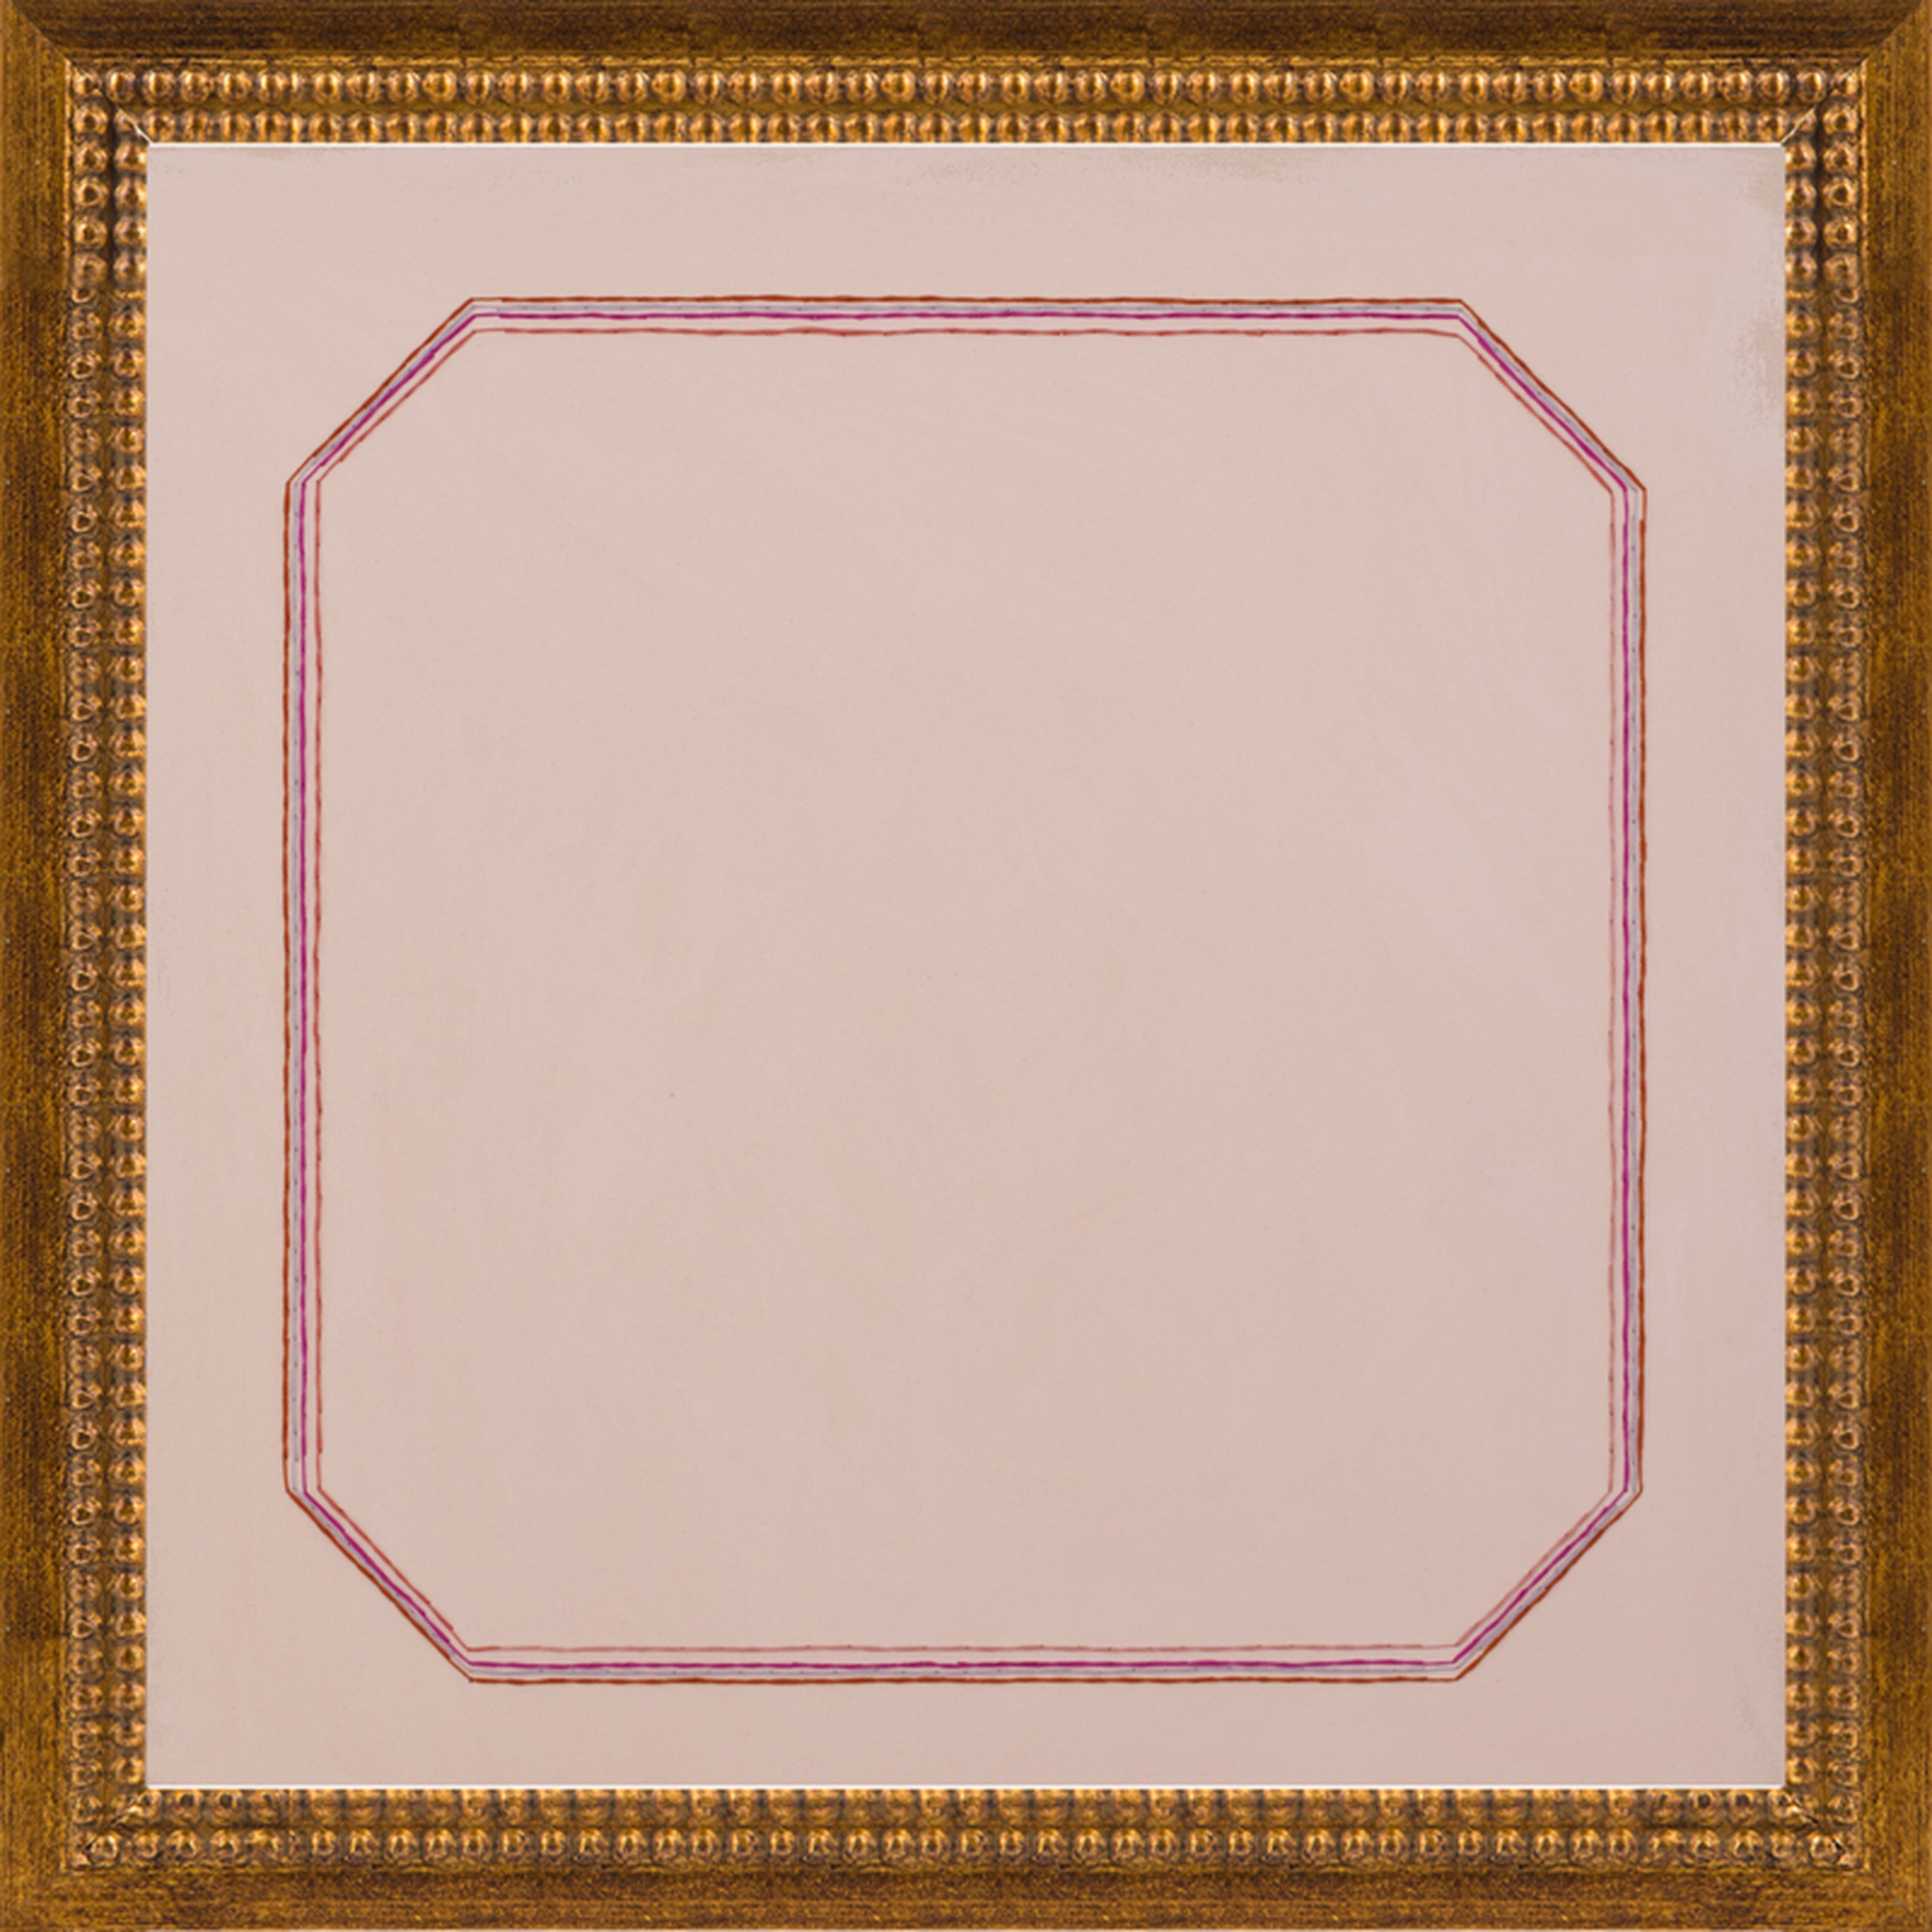 Snail Pink Bevel, Final Framed Size - 16 x 16, Gold Double Bead Wood Frame - Artfully Walls